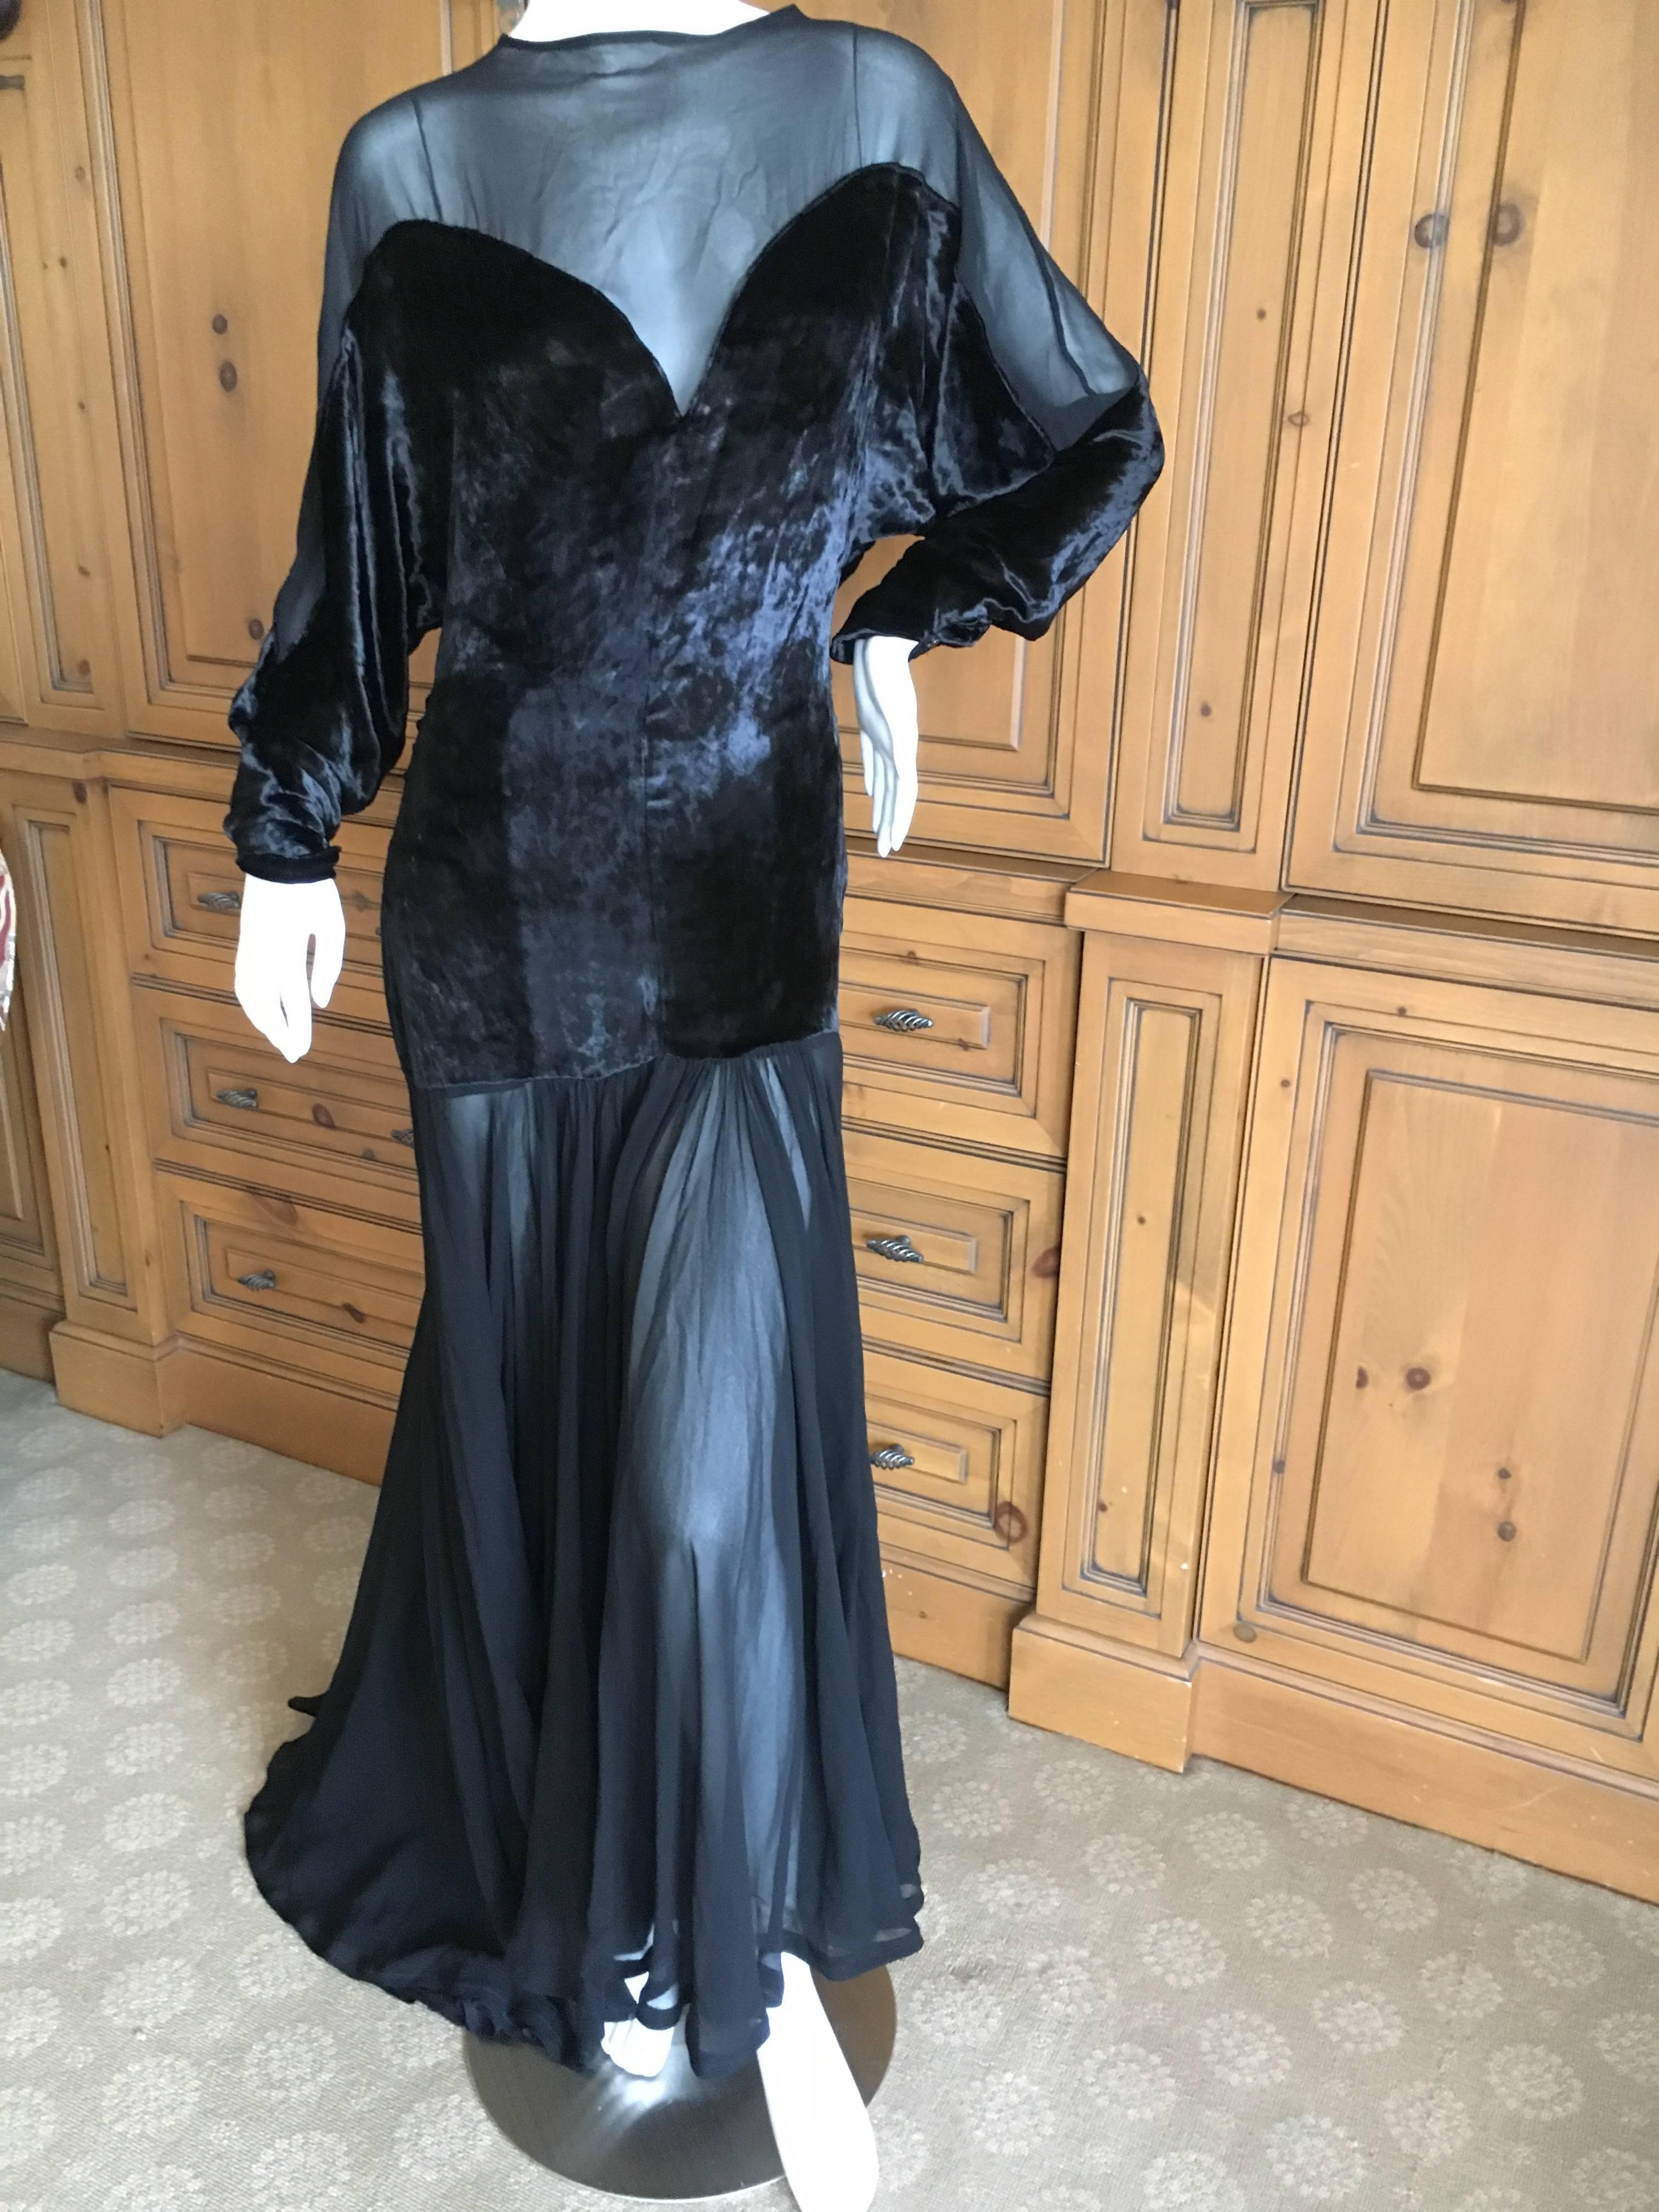 Thierry Mugler Black Velvet and Sheer Chiffon Evening Dress.
This is exquisite, with a velvet bodice and seductive sheer chiffon skirt and bust.
Pure Thierry Mugler drama.
Bust 40"
Waist 30"
Hips 45"
Length 60"
There is a